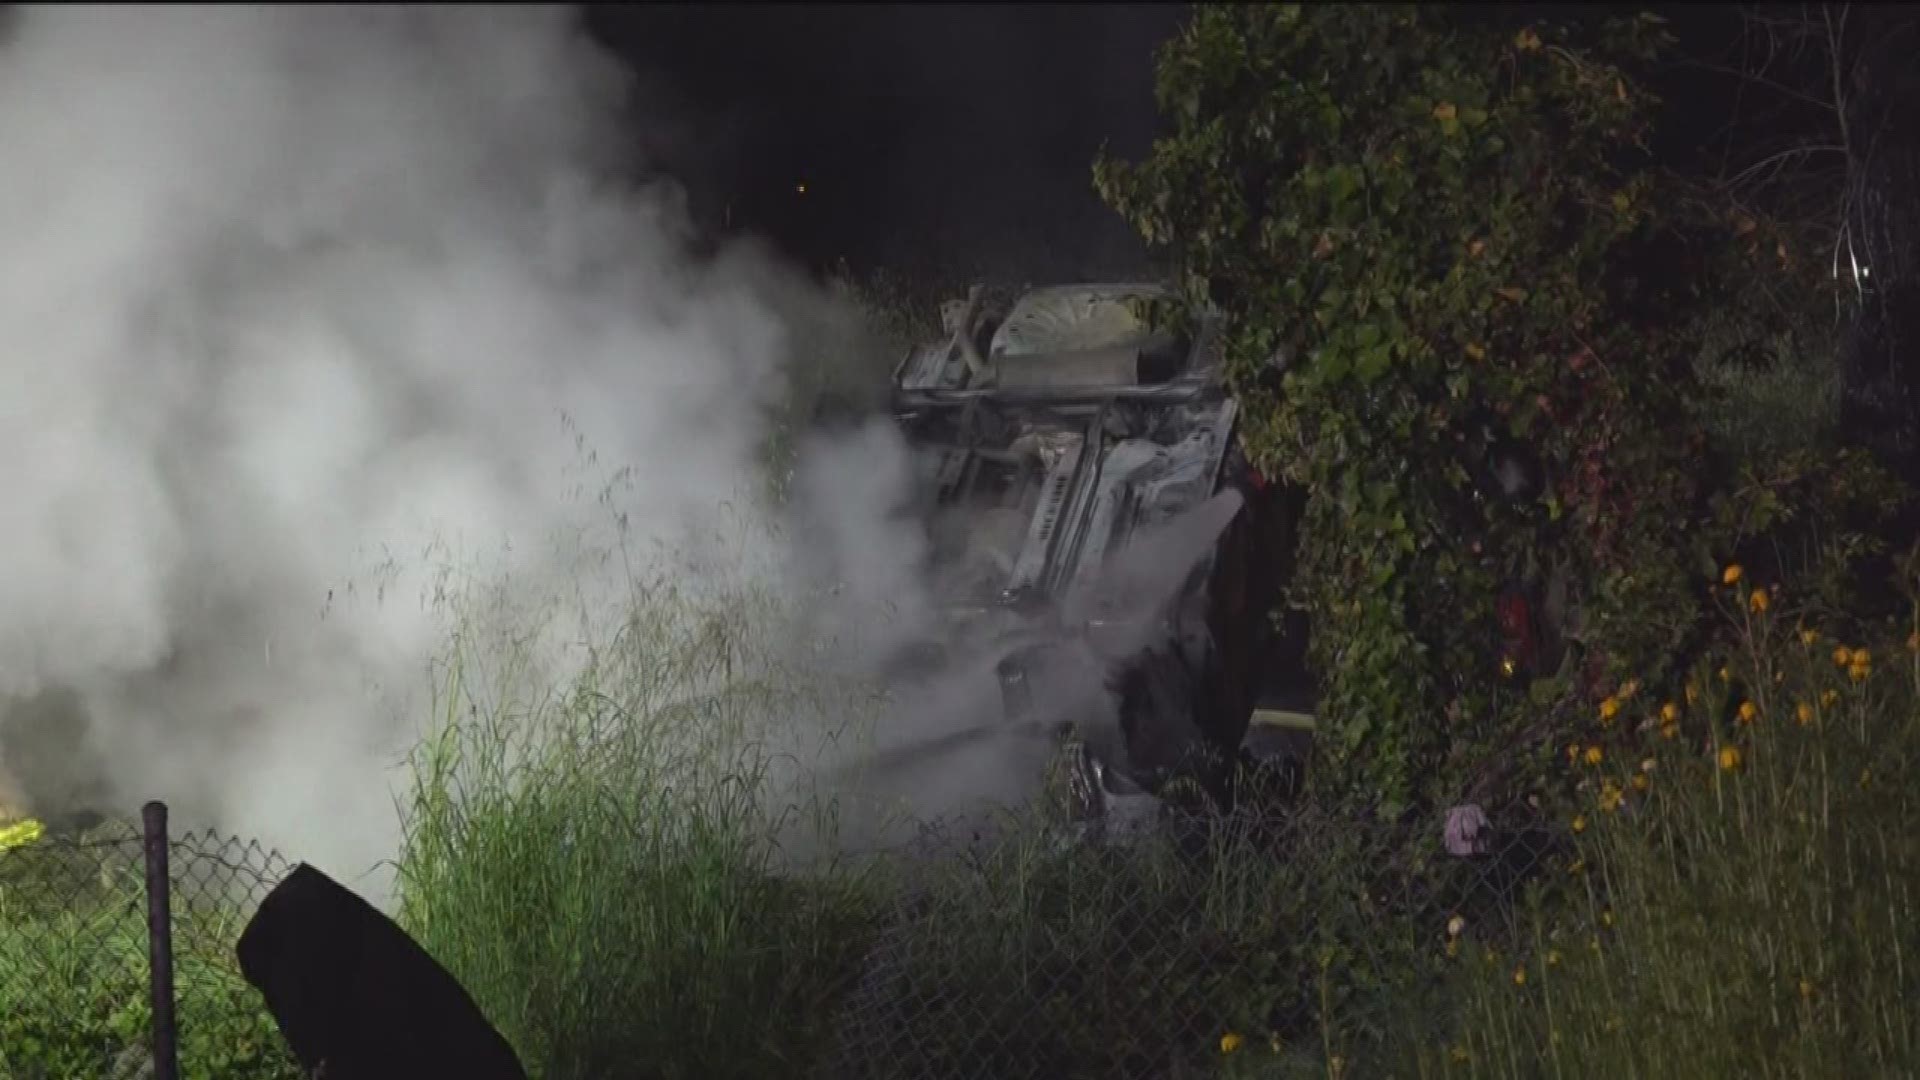 A motorist was killed after going up an embankment and hitting two trees in a fiery rollover crash in Grantville.